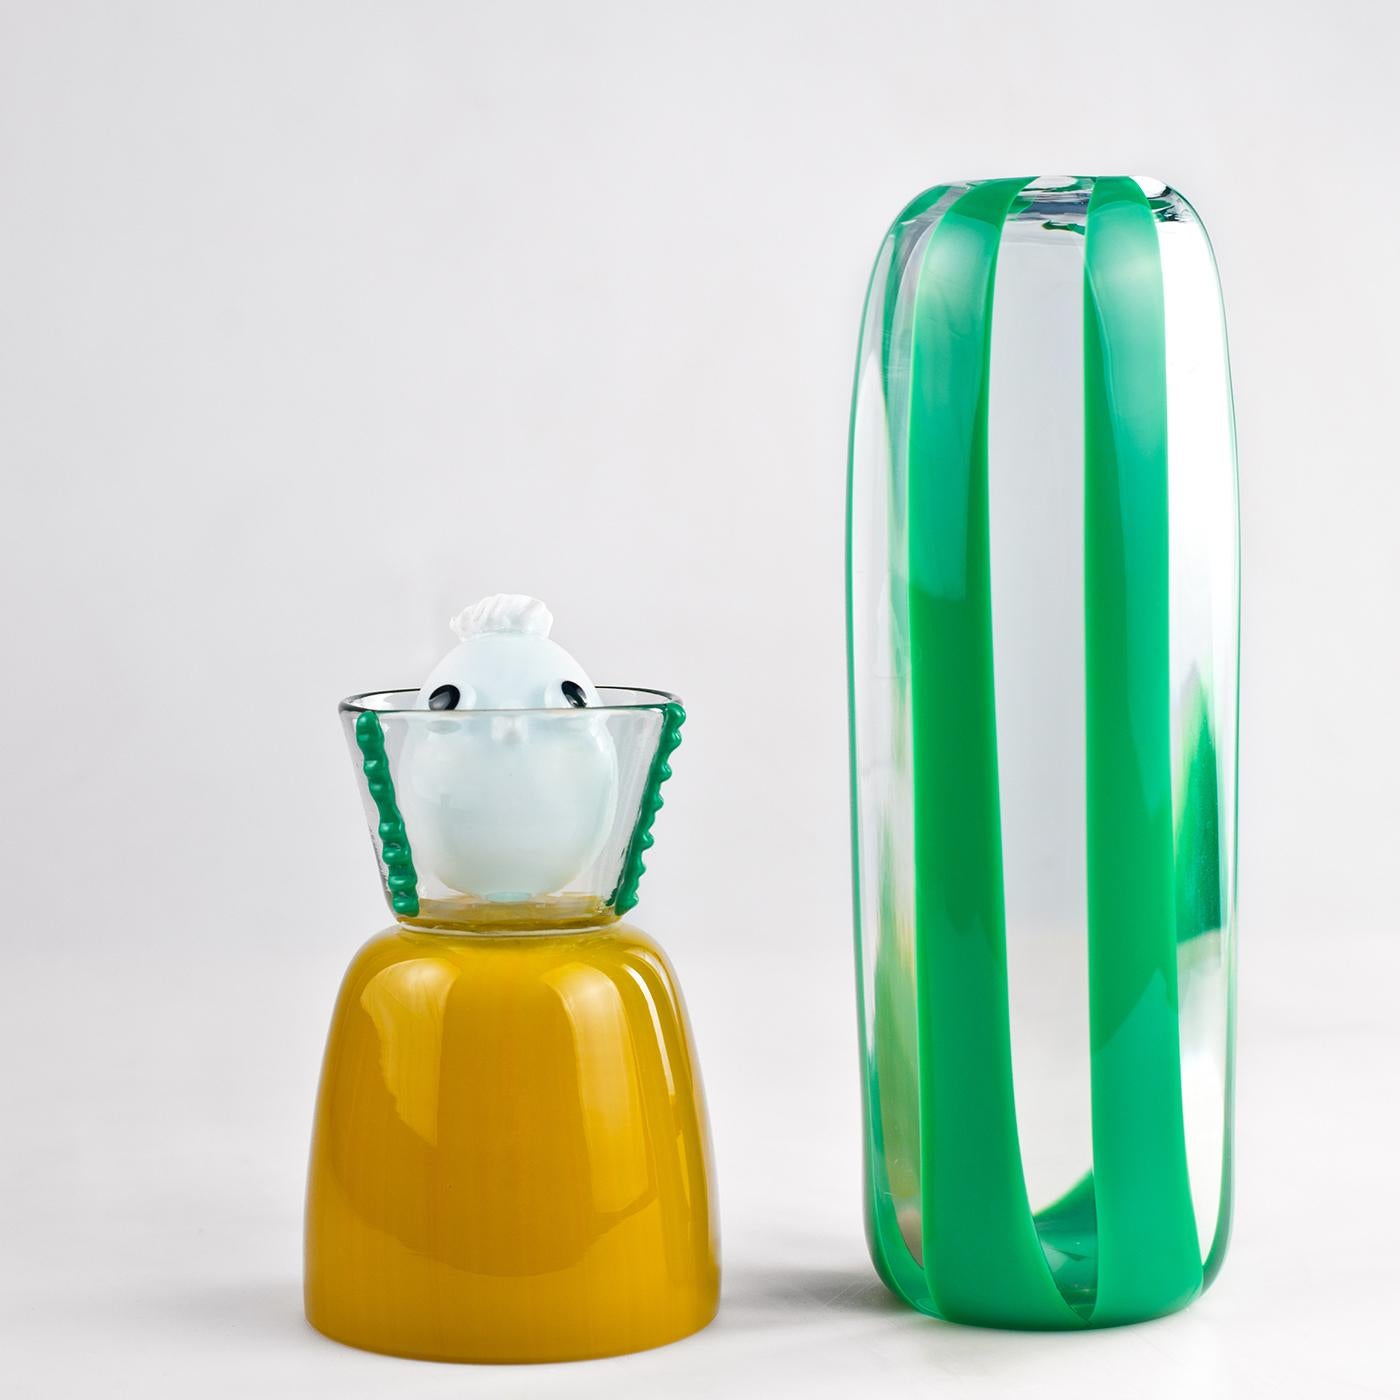 A unique character in three pieces for a mysterious effect. With a mustard yellow bust, the piece rests on a lively base in transparent glass with green stripes. The piece is topped with a transparent glass collar, protecting a white glass head with